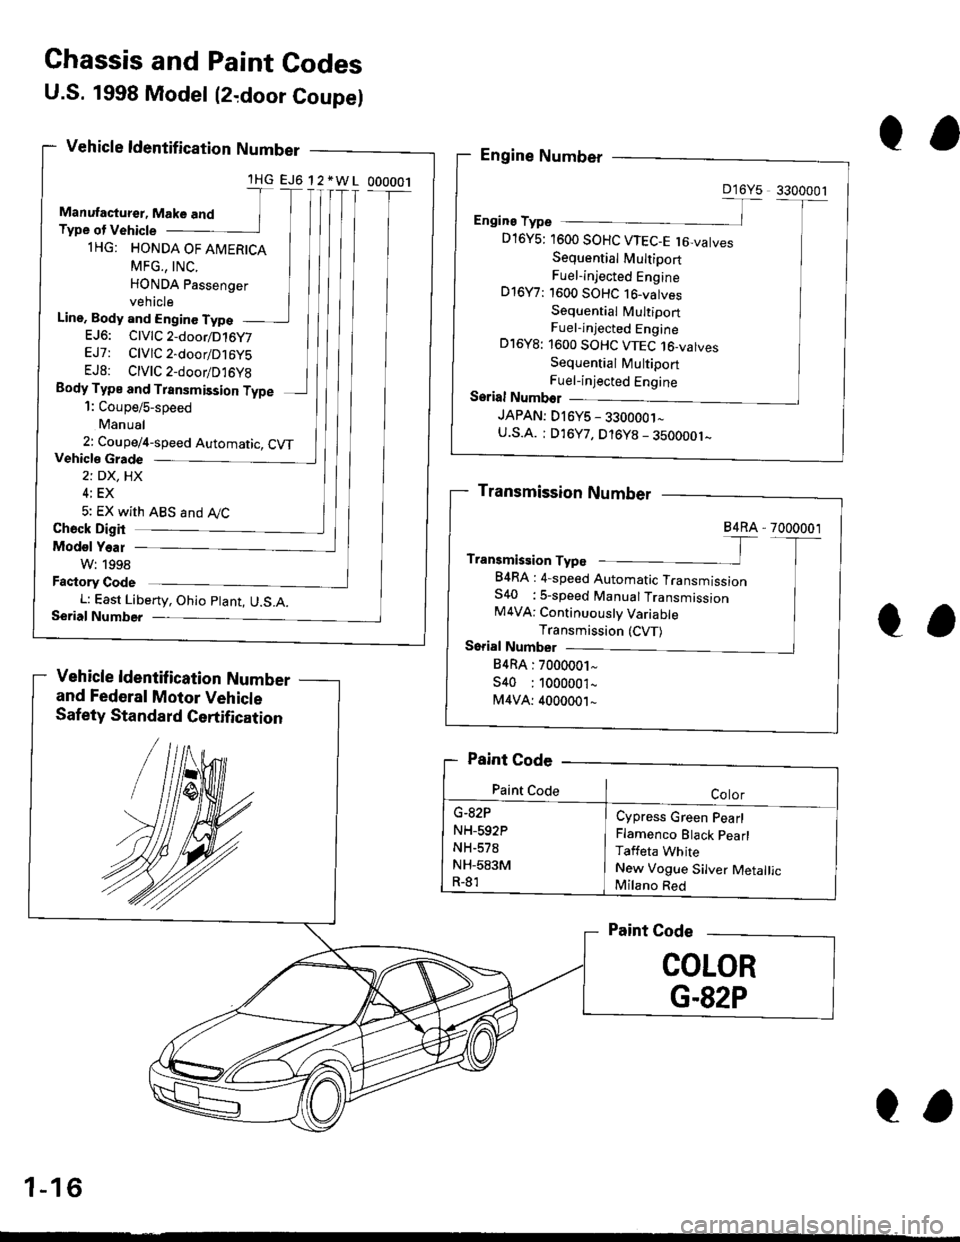 HONDA CIVIC 1997 6.G User Guide Ghassis and Paint Codes
U.S. 1998 Model (2,door Coupel
Vehicle ldentif ication Number
and Federal Motor Vehicle
Safety Standard Certification
lHG EJ6 12*WL 000001
Line, Body and Enginc TypeEJ6: ClVlC2